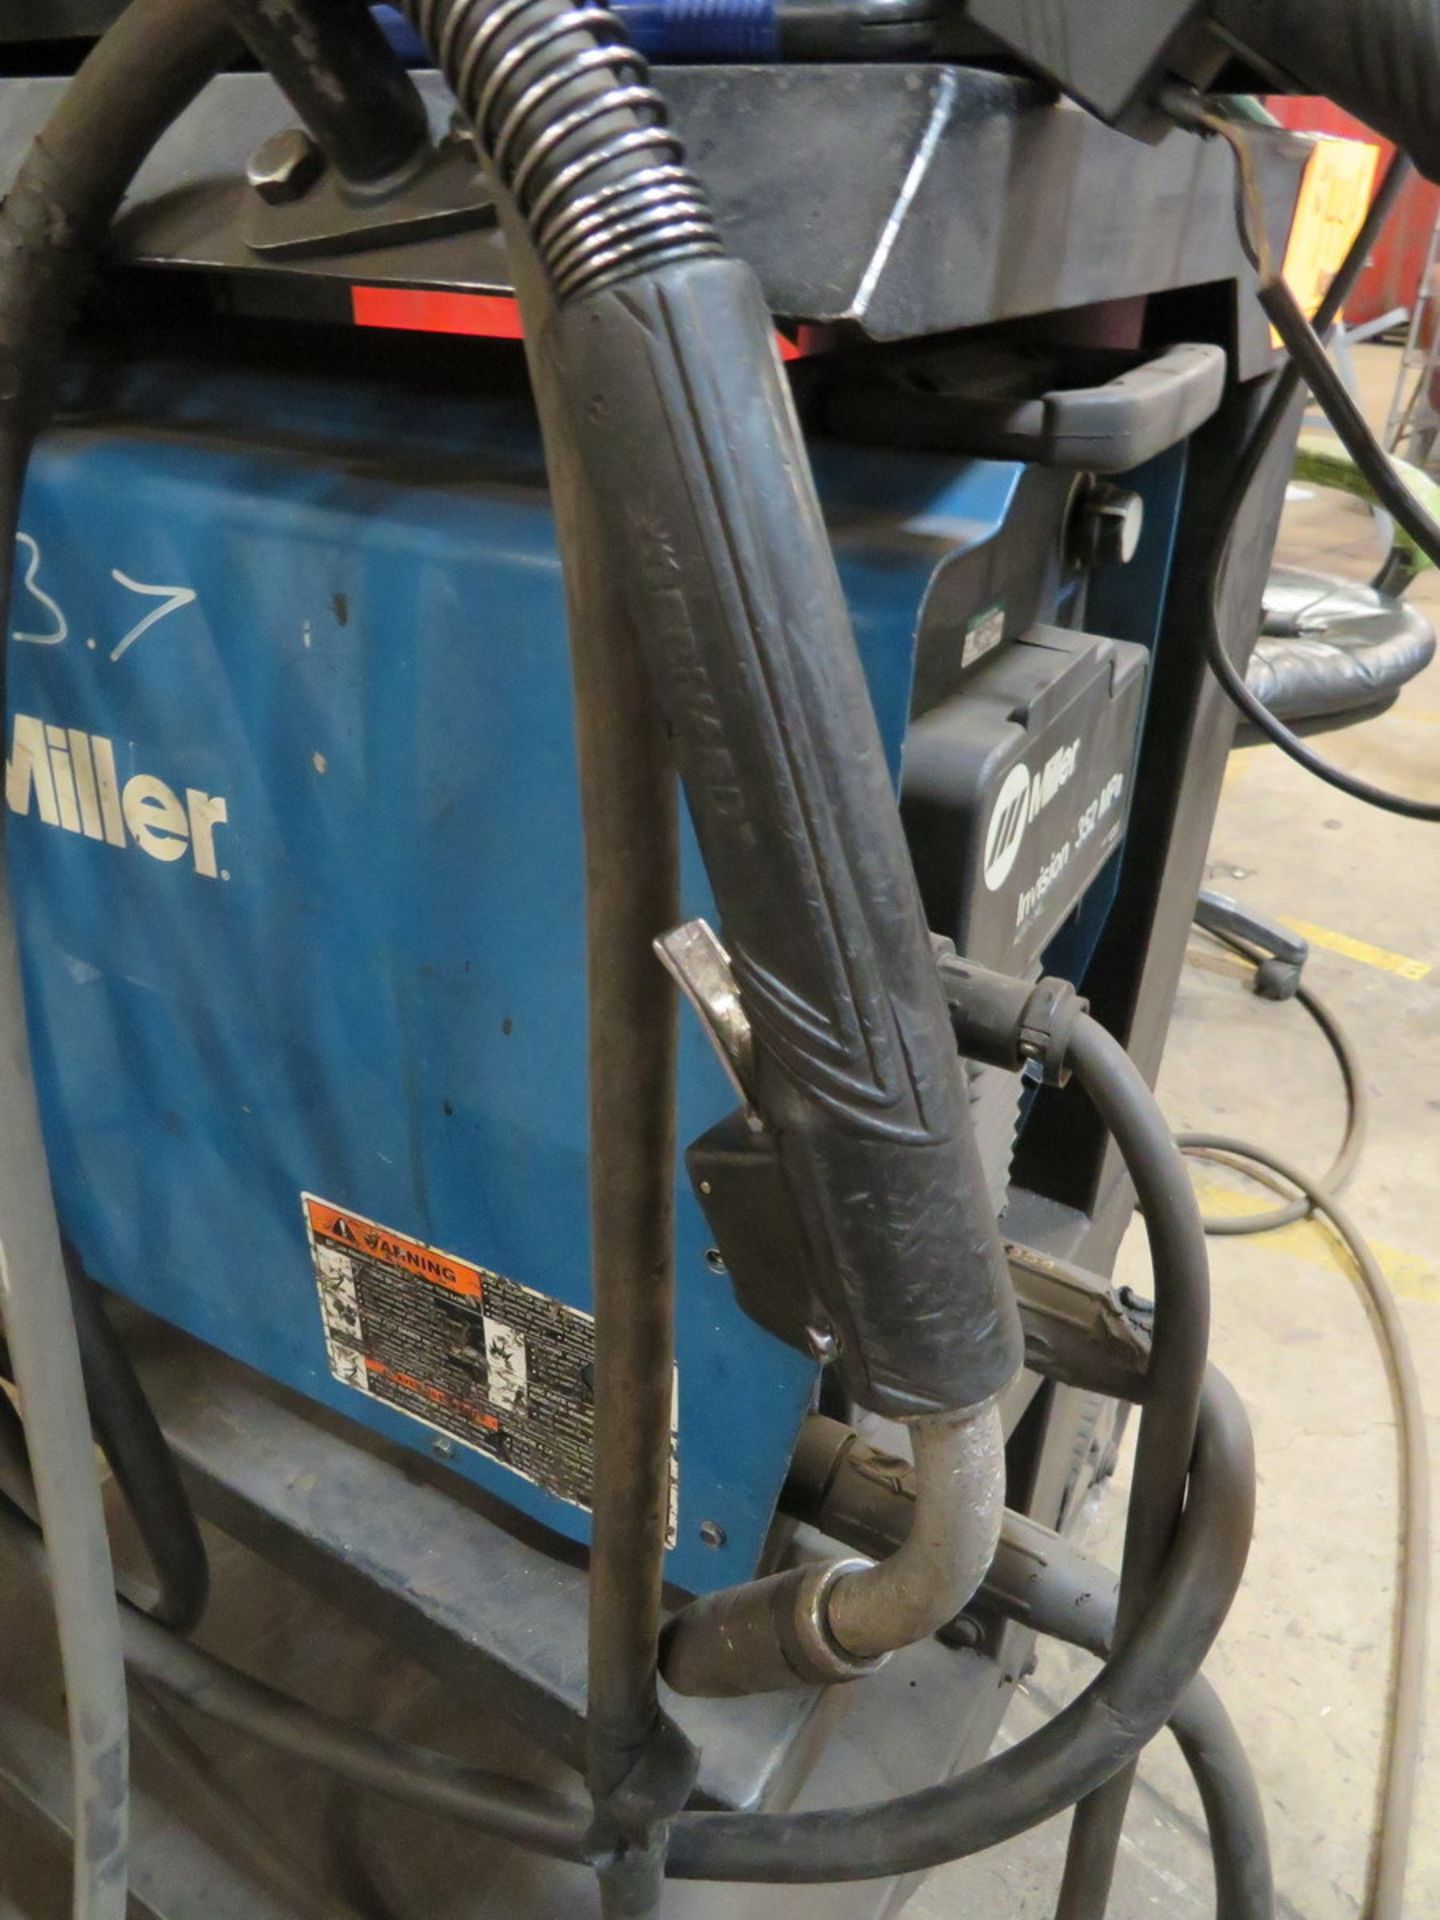 2010 Miller Invision 352MPa Welding Power Source - Image 5 of 6